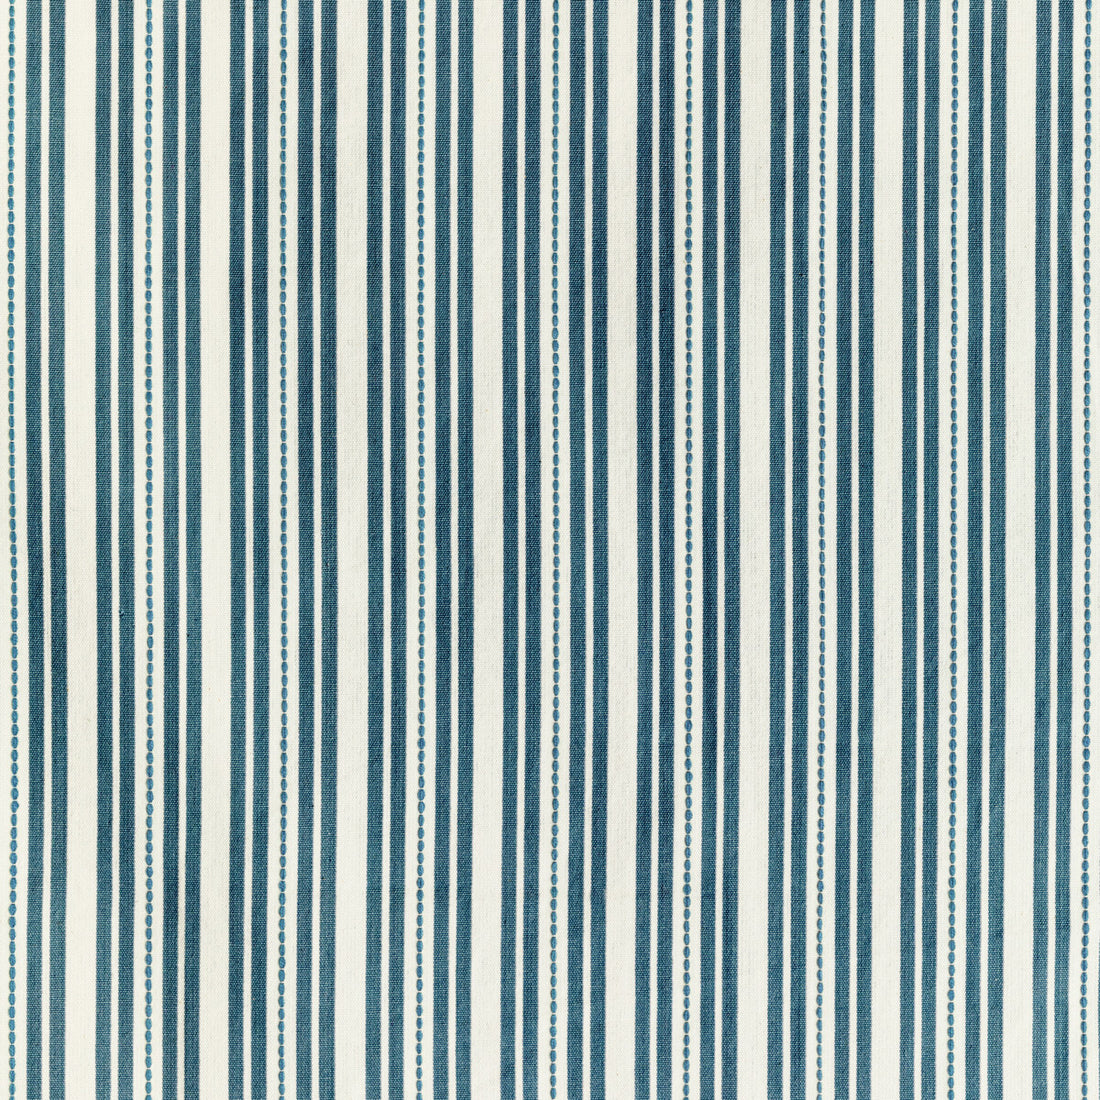 Basics fabric in 36046-5 color - pattern 36046.5.0 - by Kravet Basics in the L&